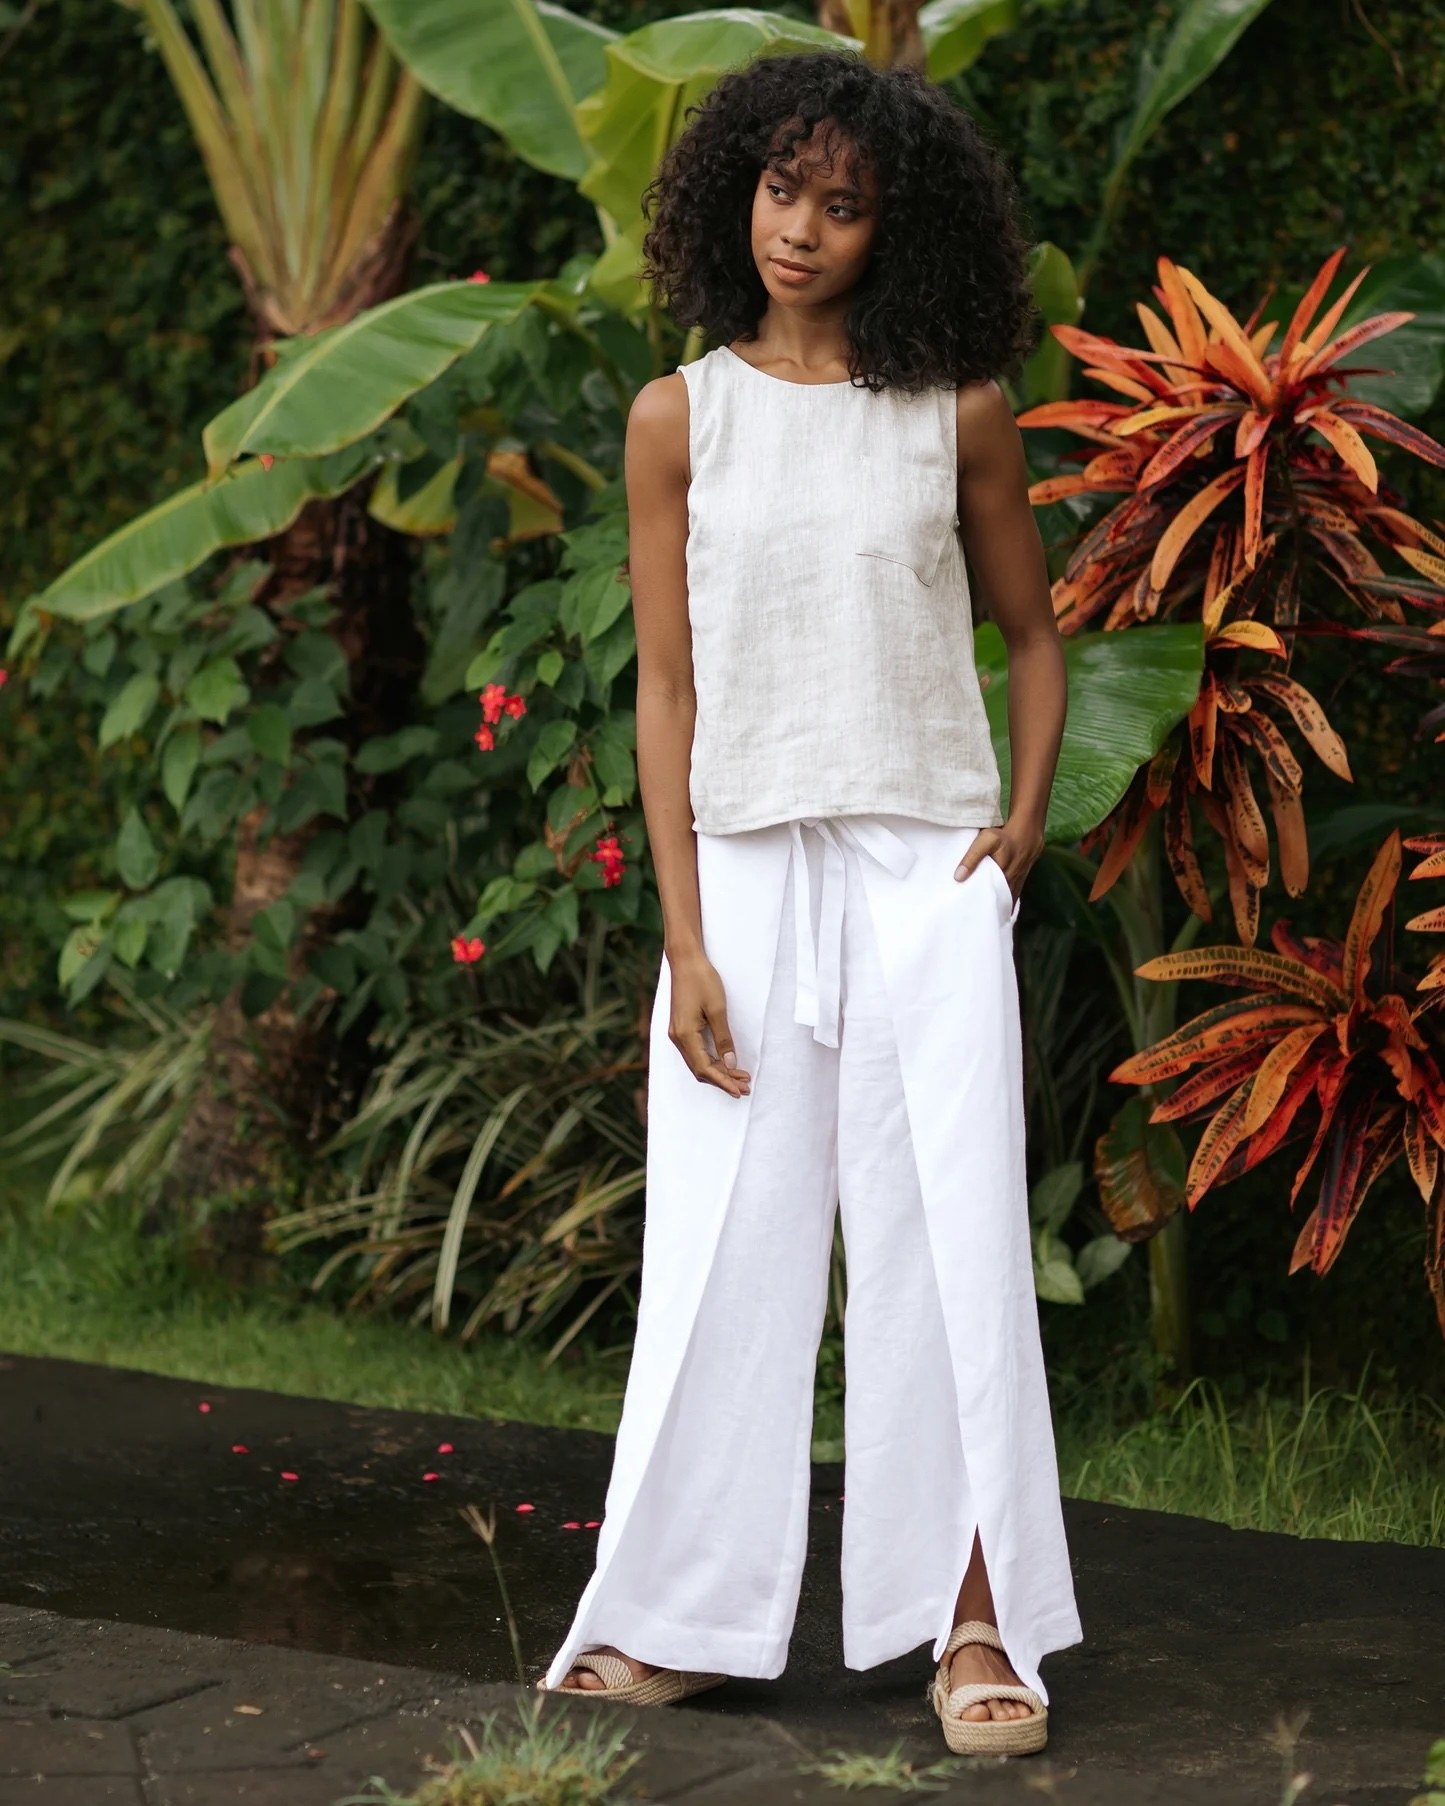 A model wearing white pants with a white top and matching shoes